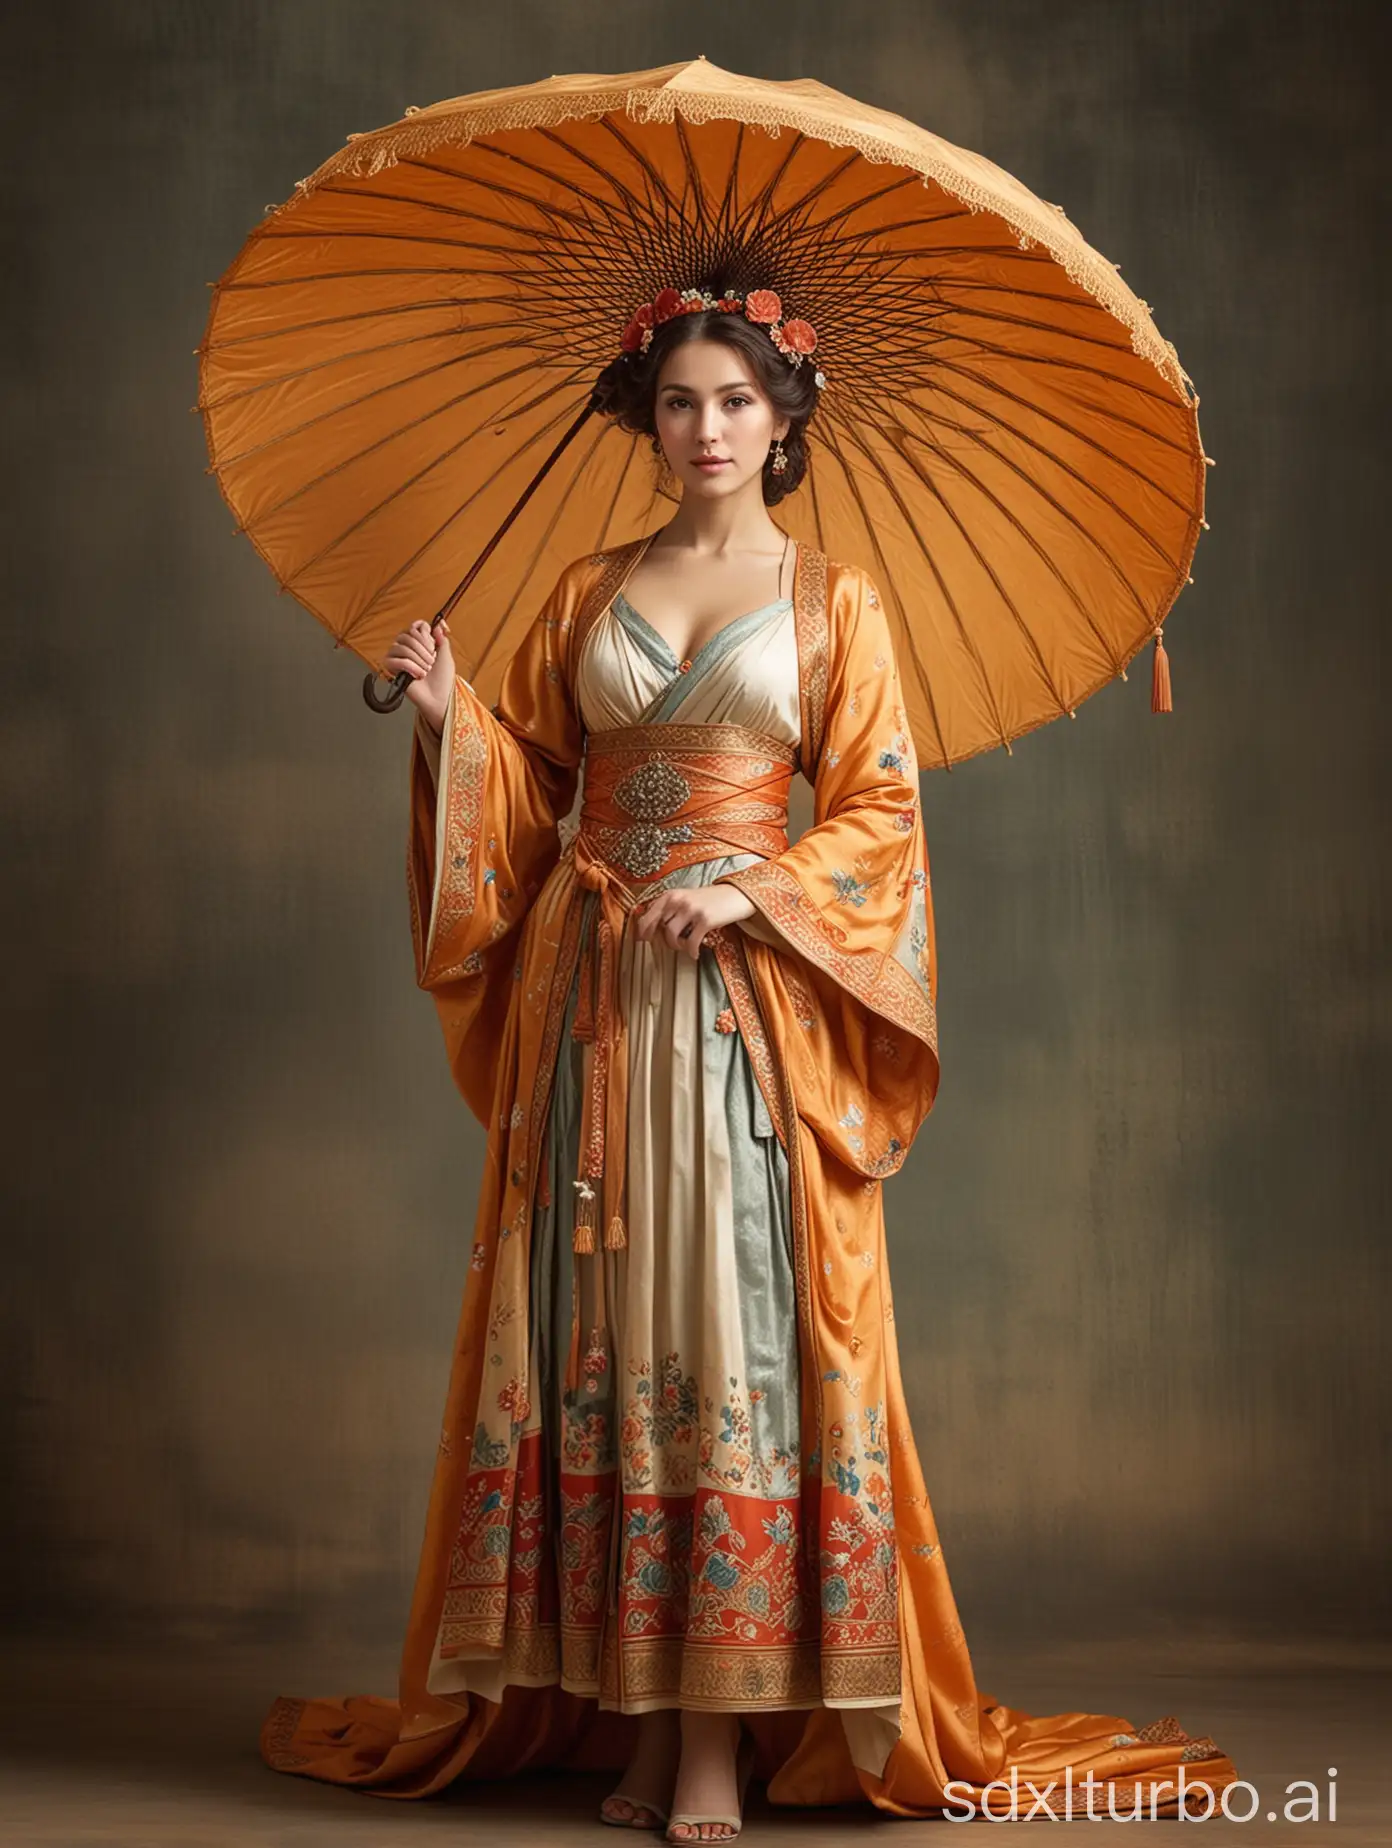 An ancient costume beauty holding an umbrella, with an ancient background, full body